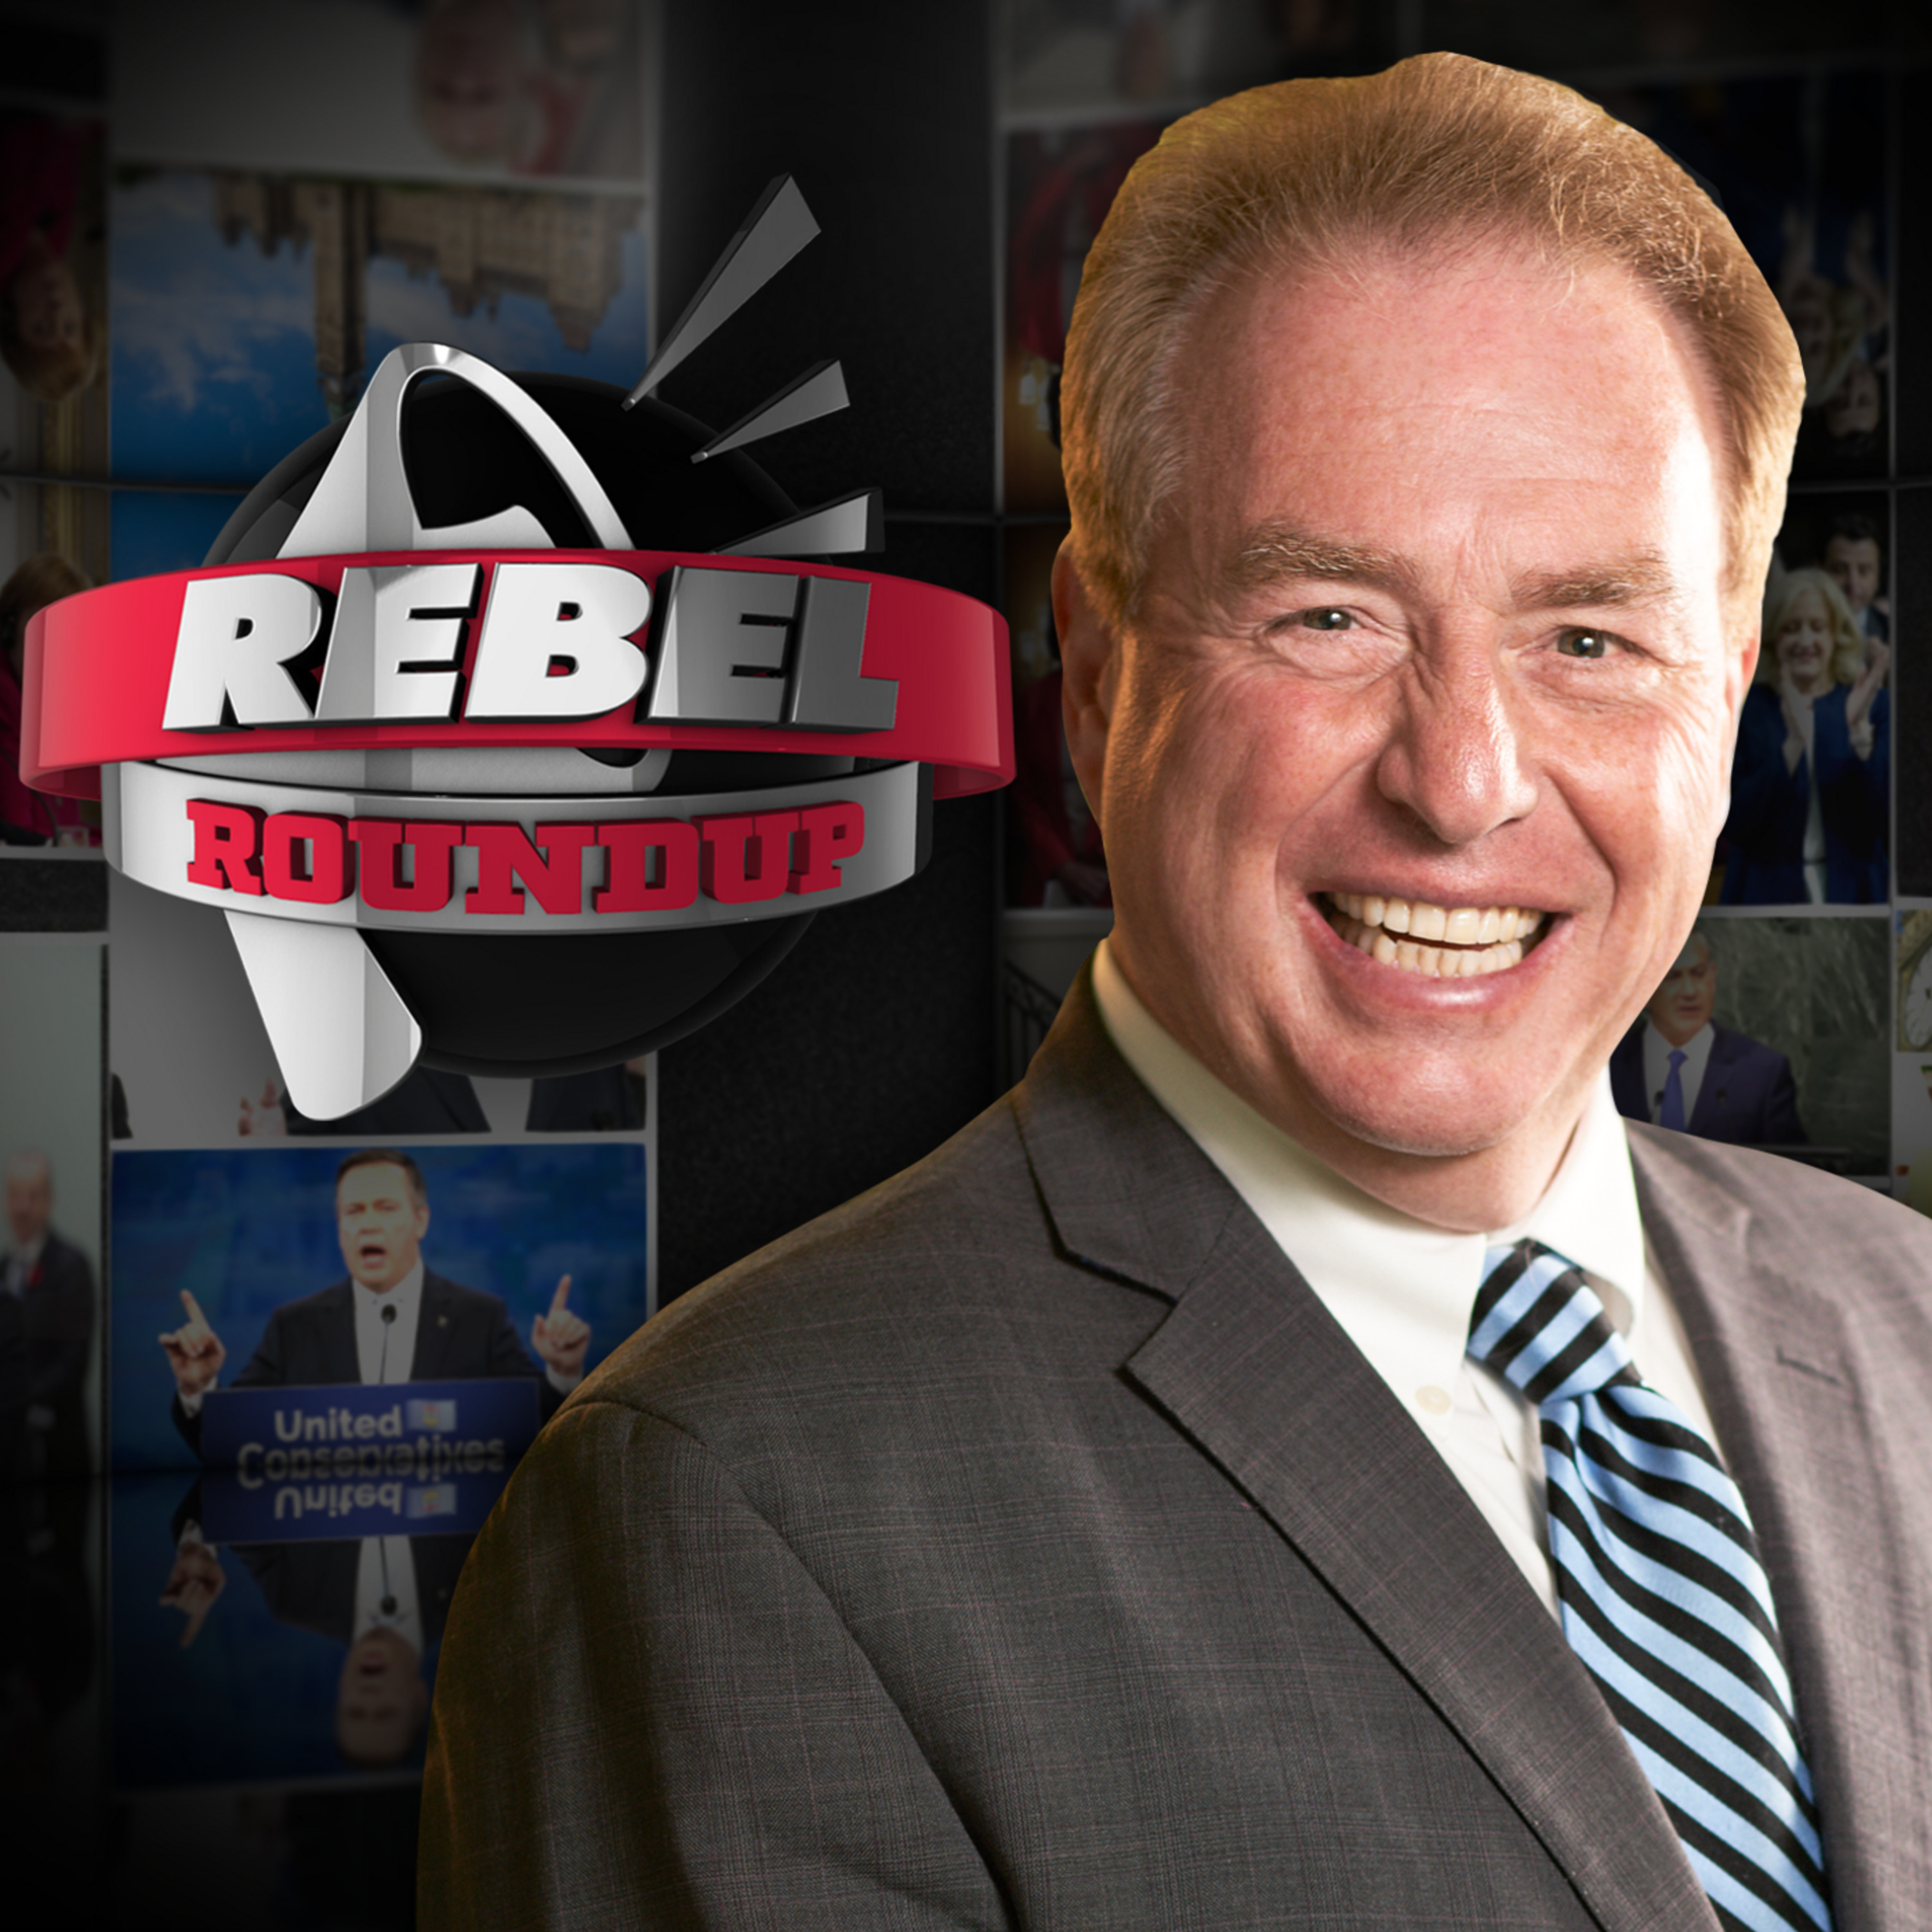 DAVID MENZIES | DeSantis sits down with Rebel; Dave Chappelle cancelled